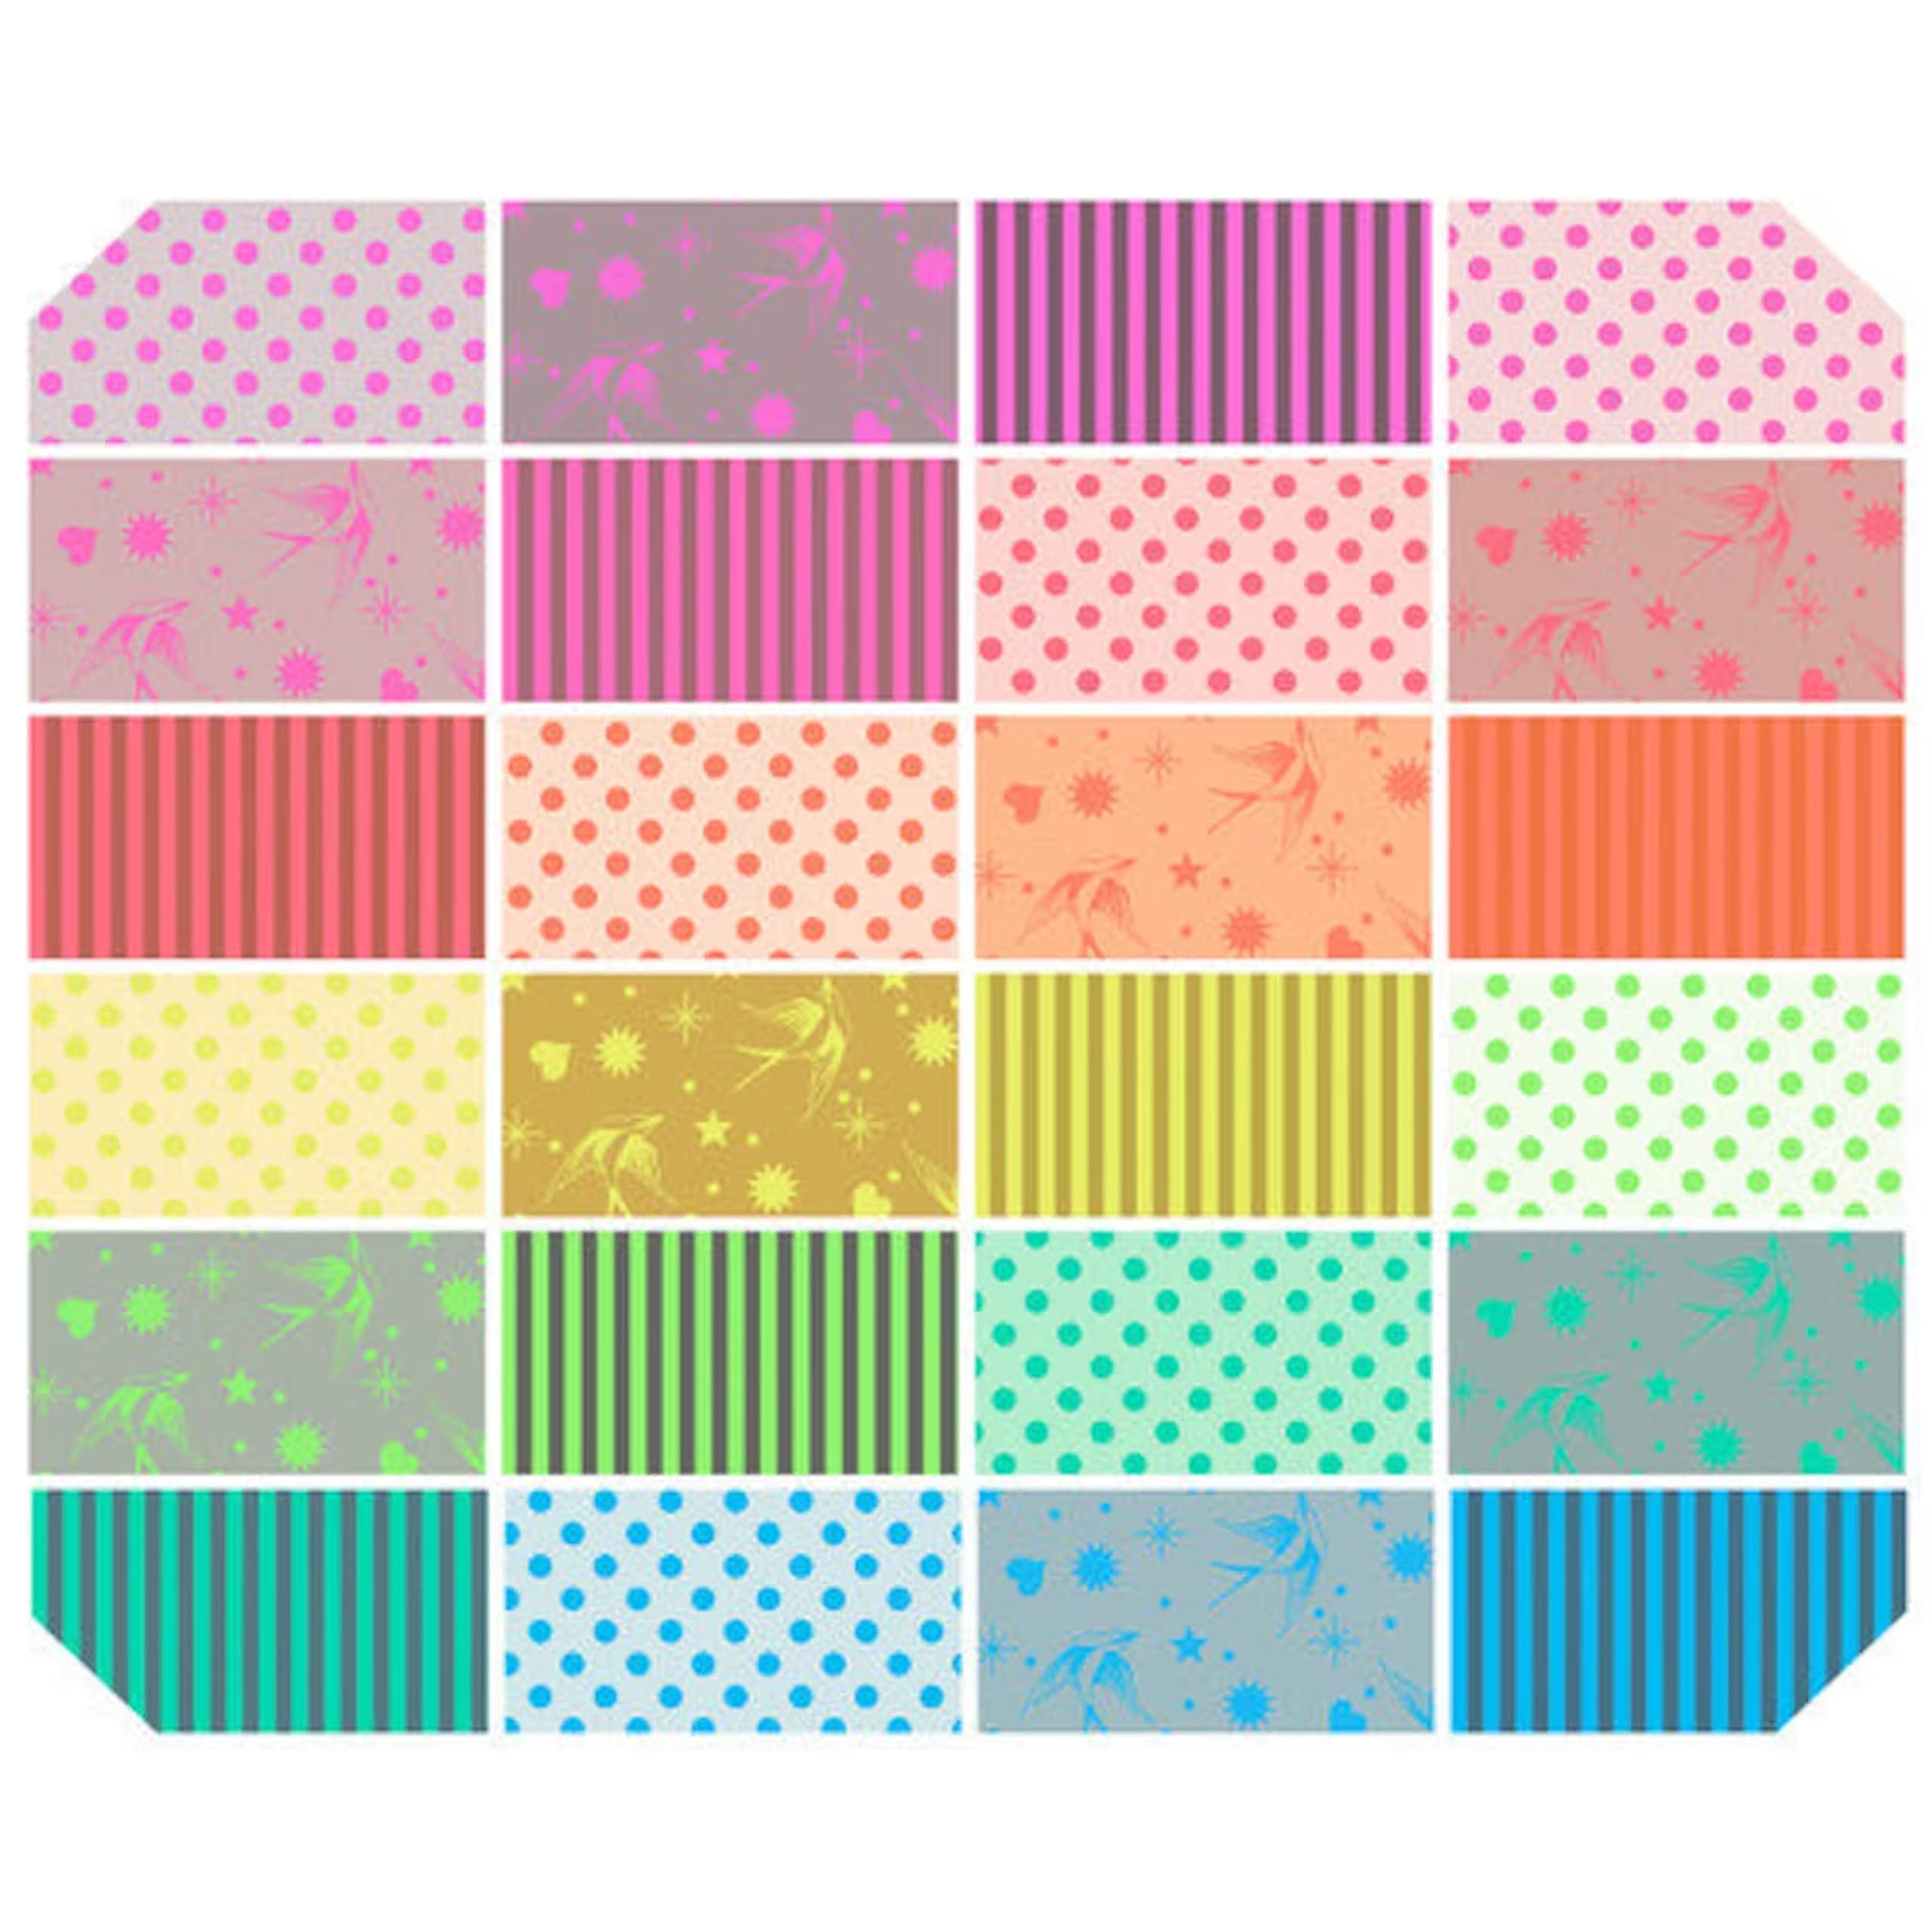 Neon True Colors 2.5'' Design Roll by Tula Pink for Free Spirit Fabrics